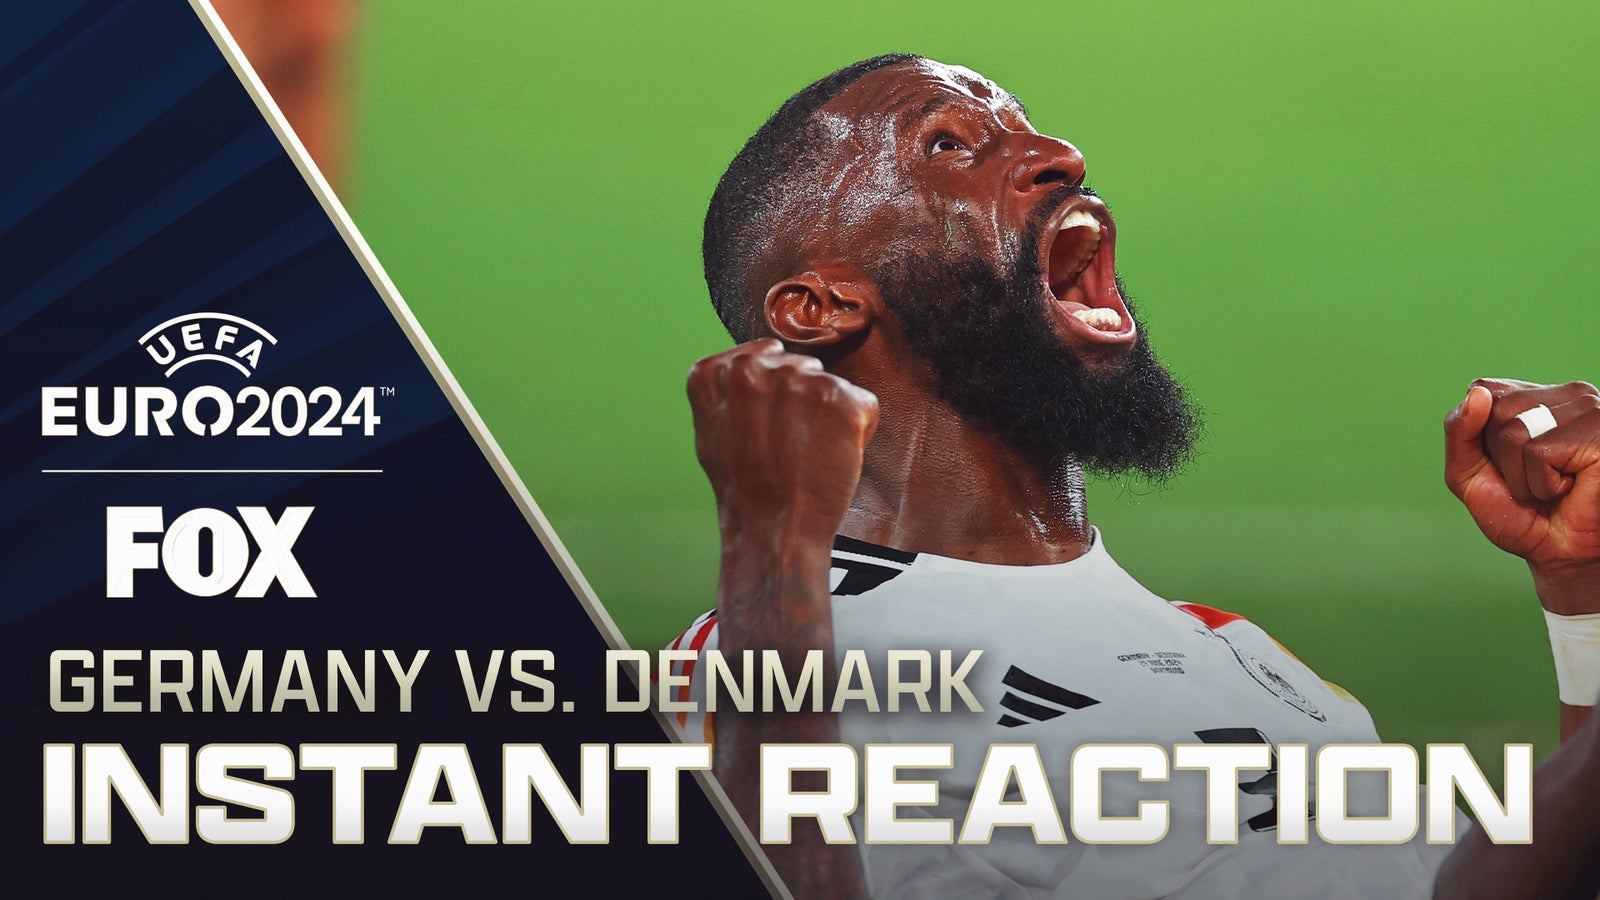 Germany vs. Denmark: instant analysis following the match